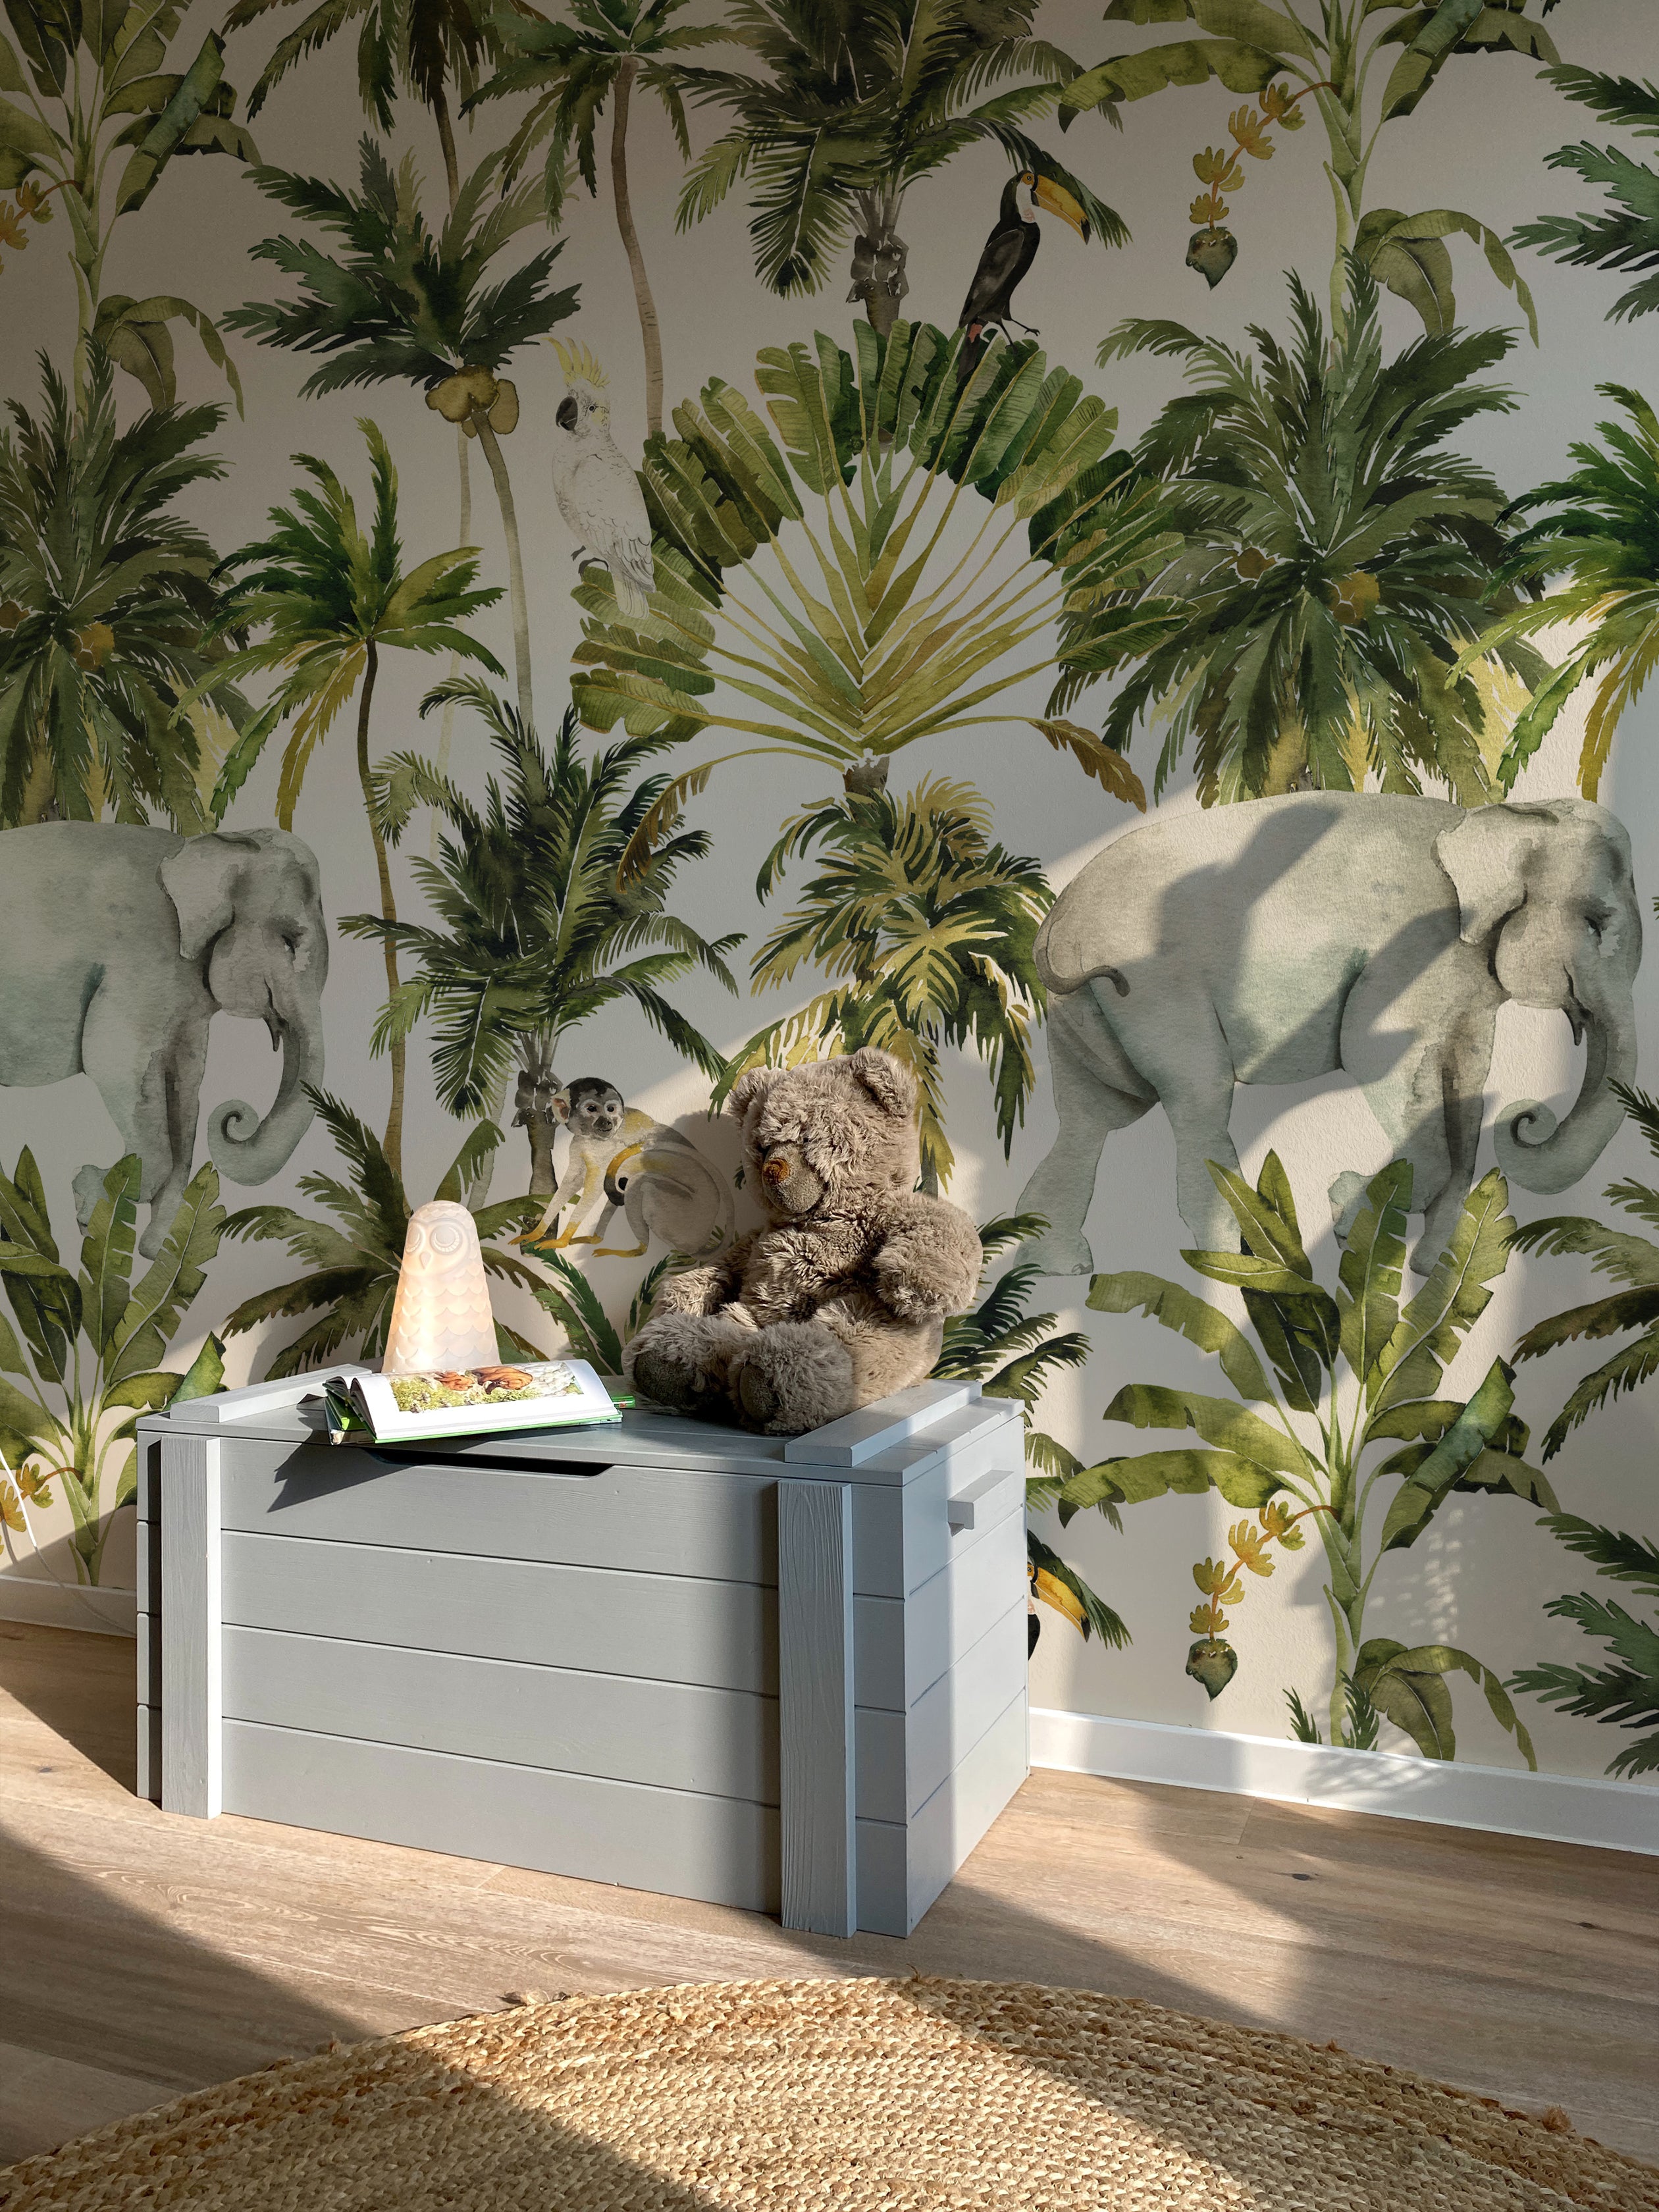 Interior shot showing a room adorned with Elephant and Palm Wallpaper - 75", which depicts a rich tropical scene including an elephant, various palms, and a cockatoo, enhancing the room with a sense of adventure and natural beauty.